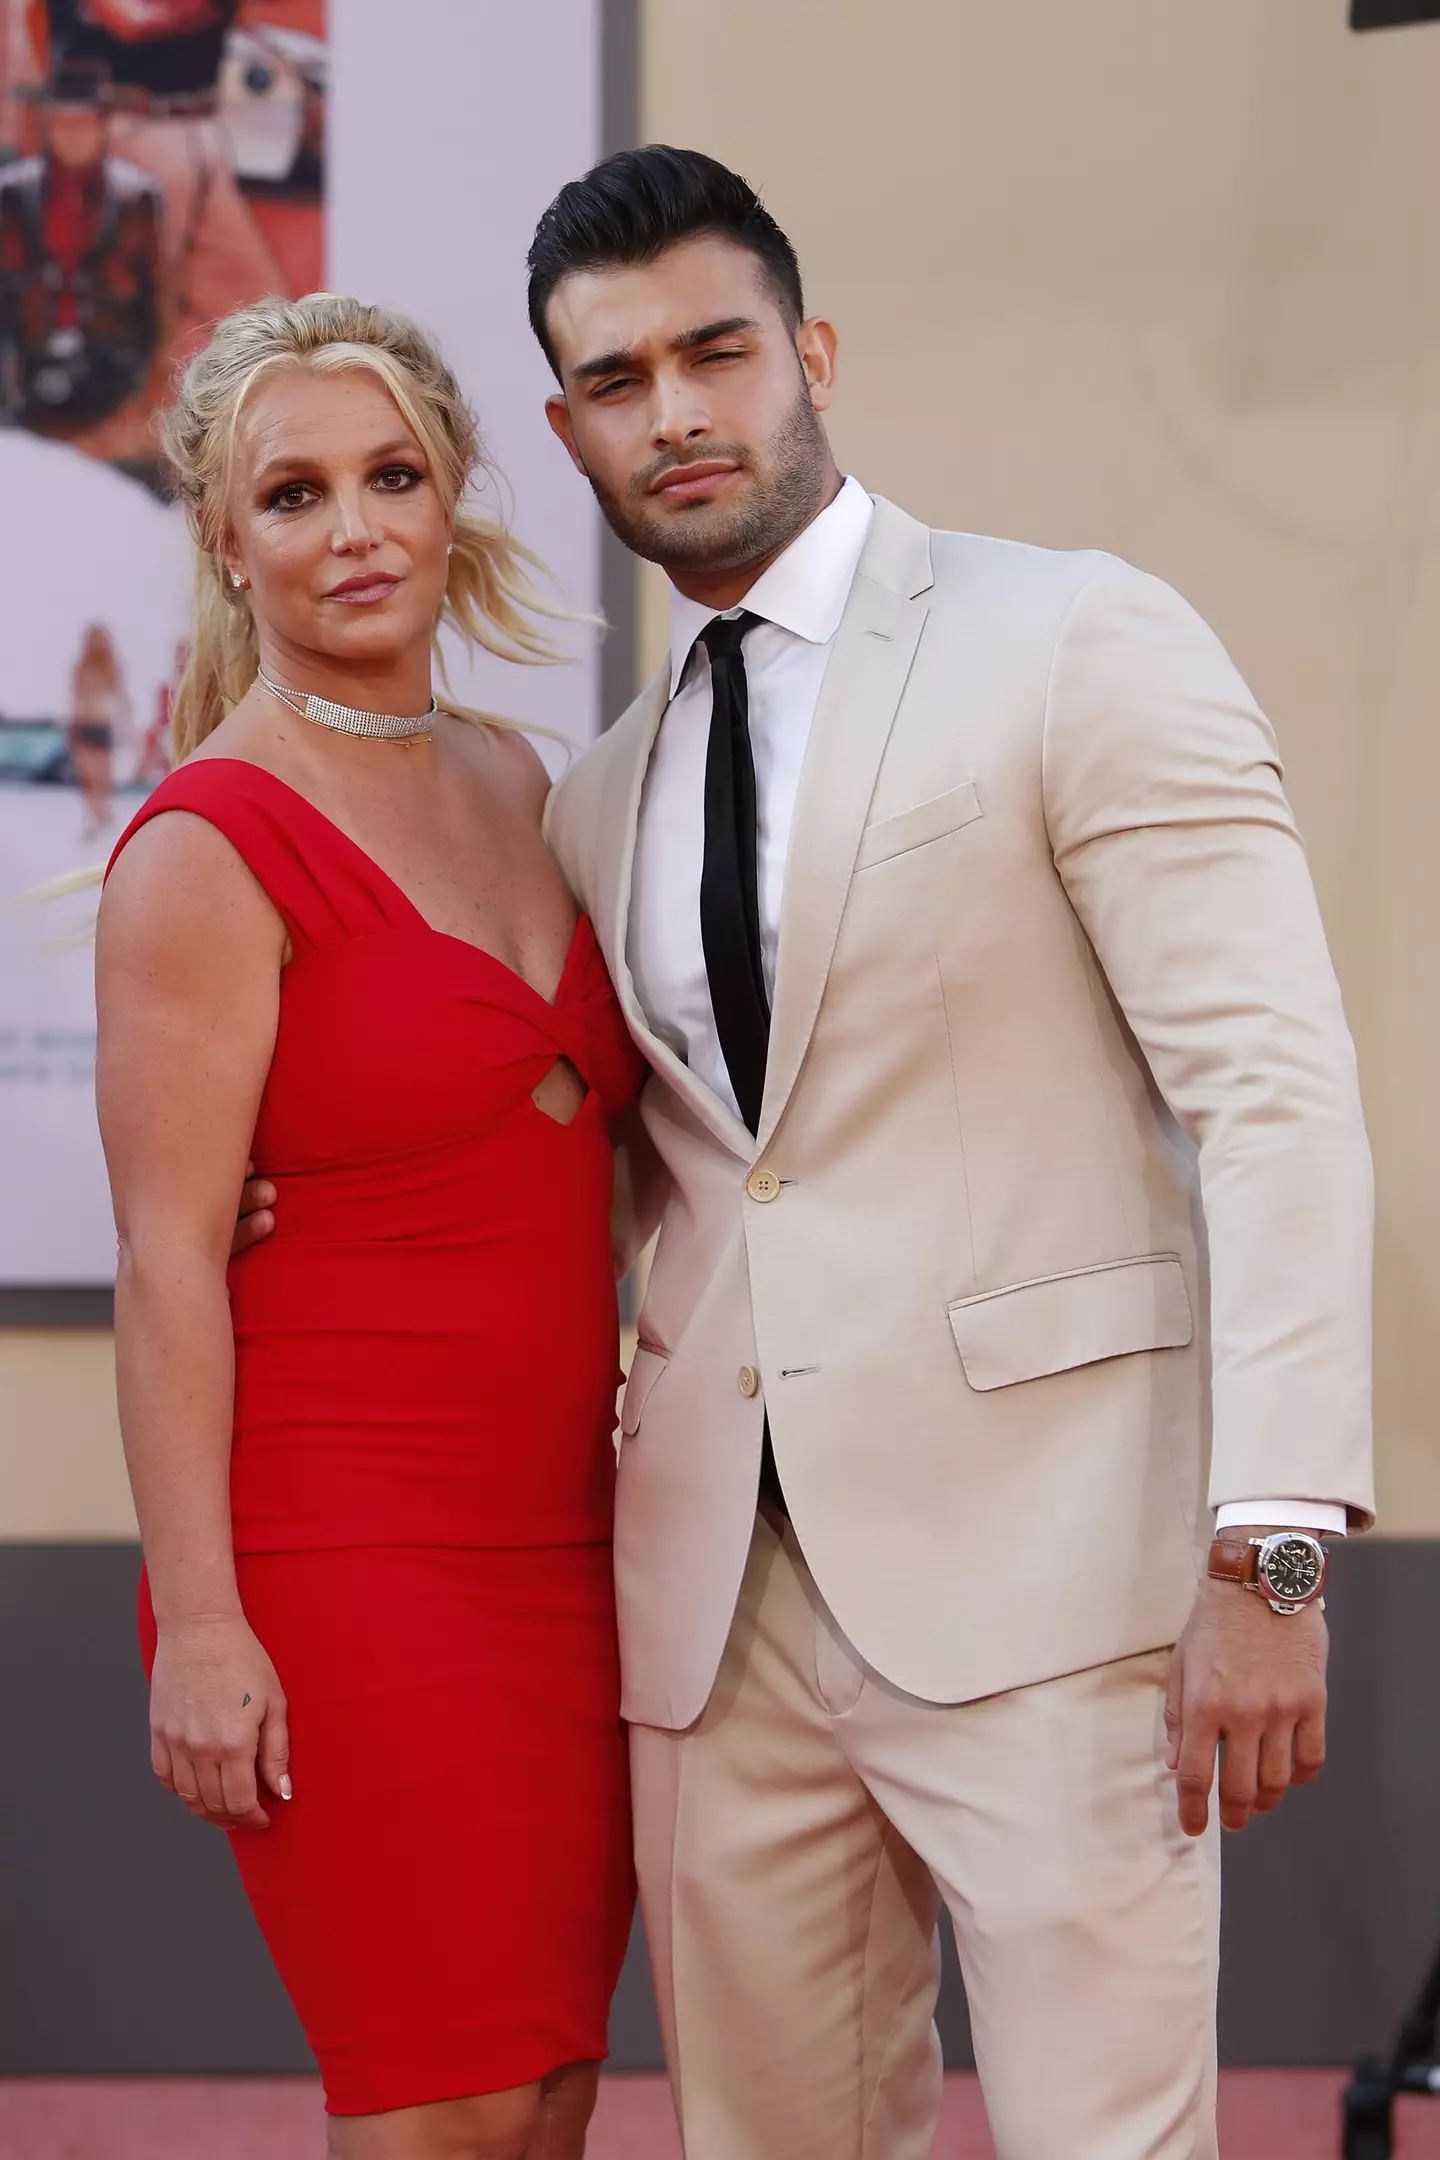 Britney Spears’ fiancé Sam Asghari has opened up following their miscarriage.